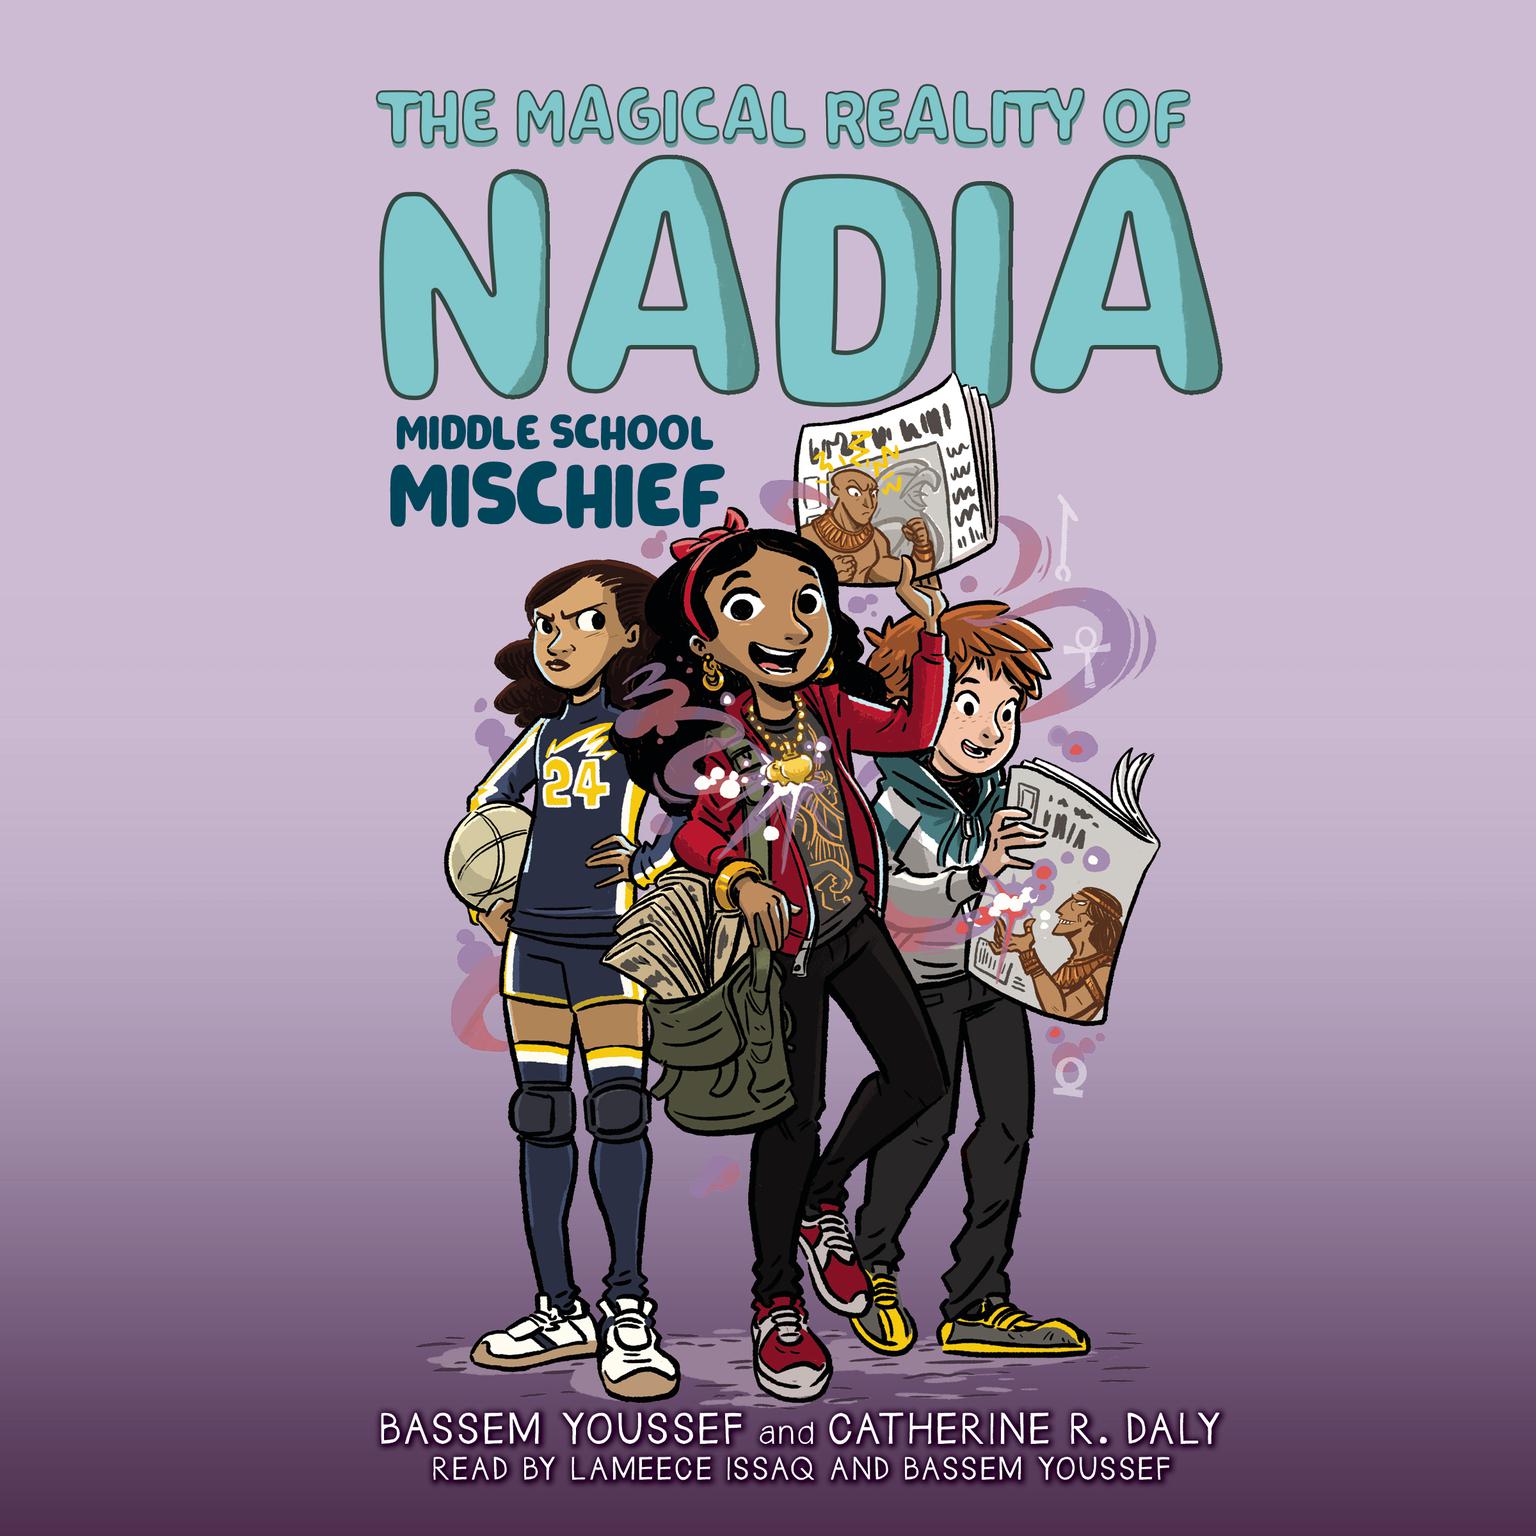 Middle School Mischief (The Magical Reality of Nadia #2) Audiobook, by Bassem Youssef